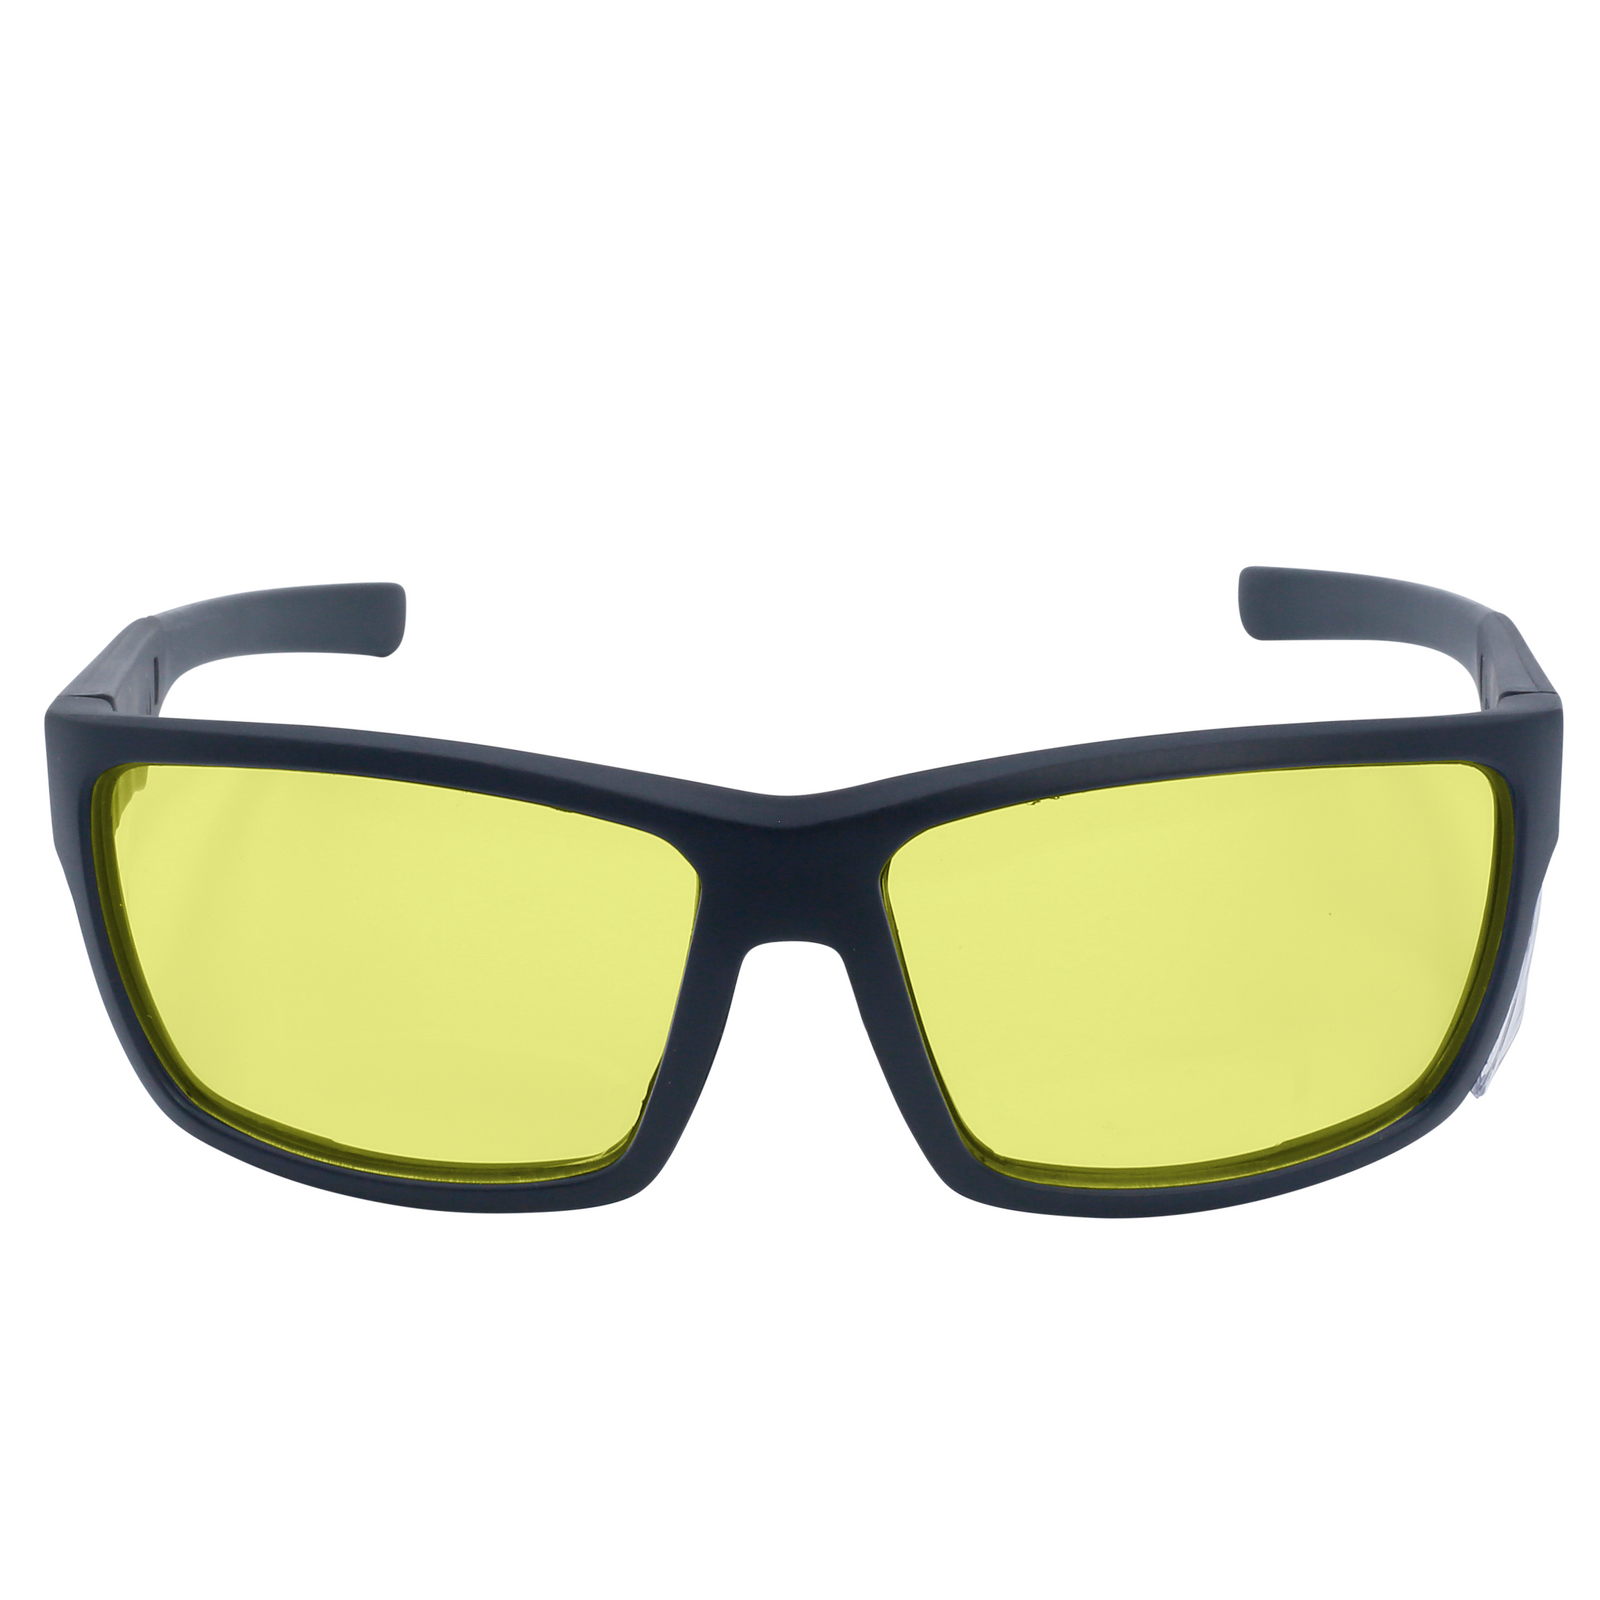 Image shows a front view of a yellow JORESTECH safety Glass with clear side shield for high impact protection. These safety glasses are ANSI compliant and have black frame and yellow polycarbonate lenses. The background of the image is white